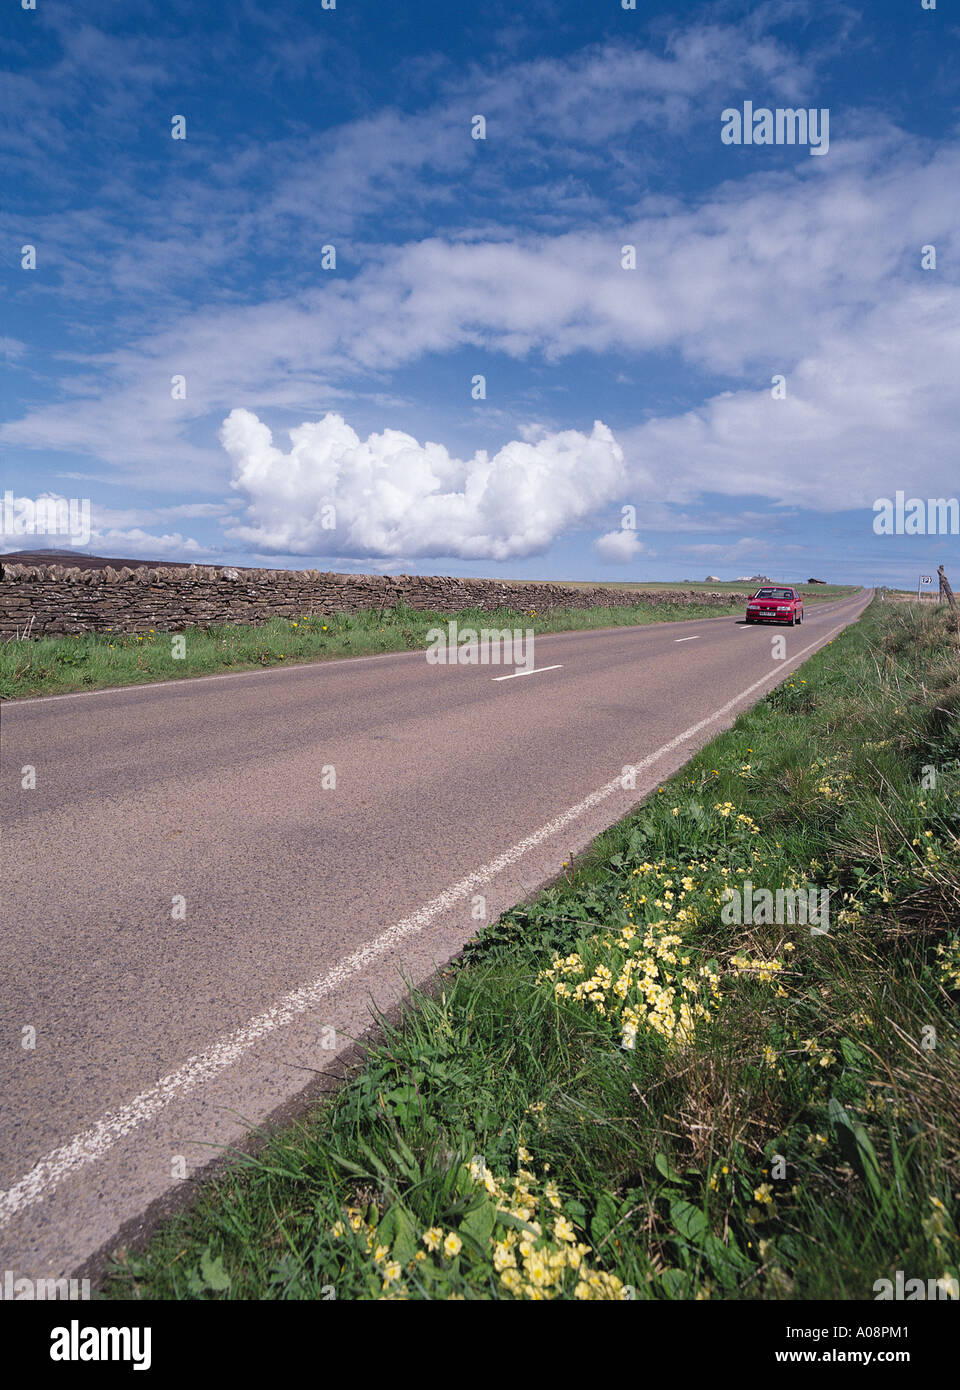 dh Hobbister ORPHIR ORKNEY Hobbister hill road car and Primorses Primula Vulgaris Stock Photo